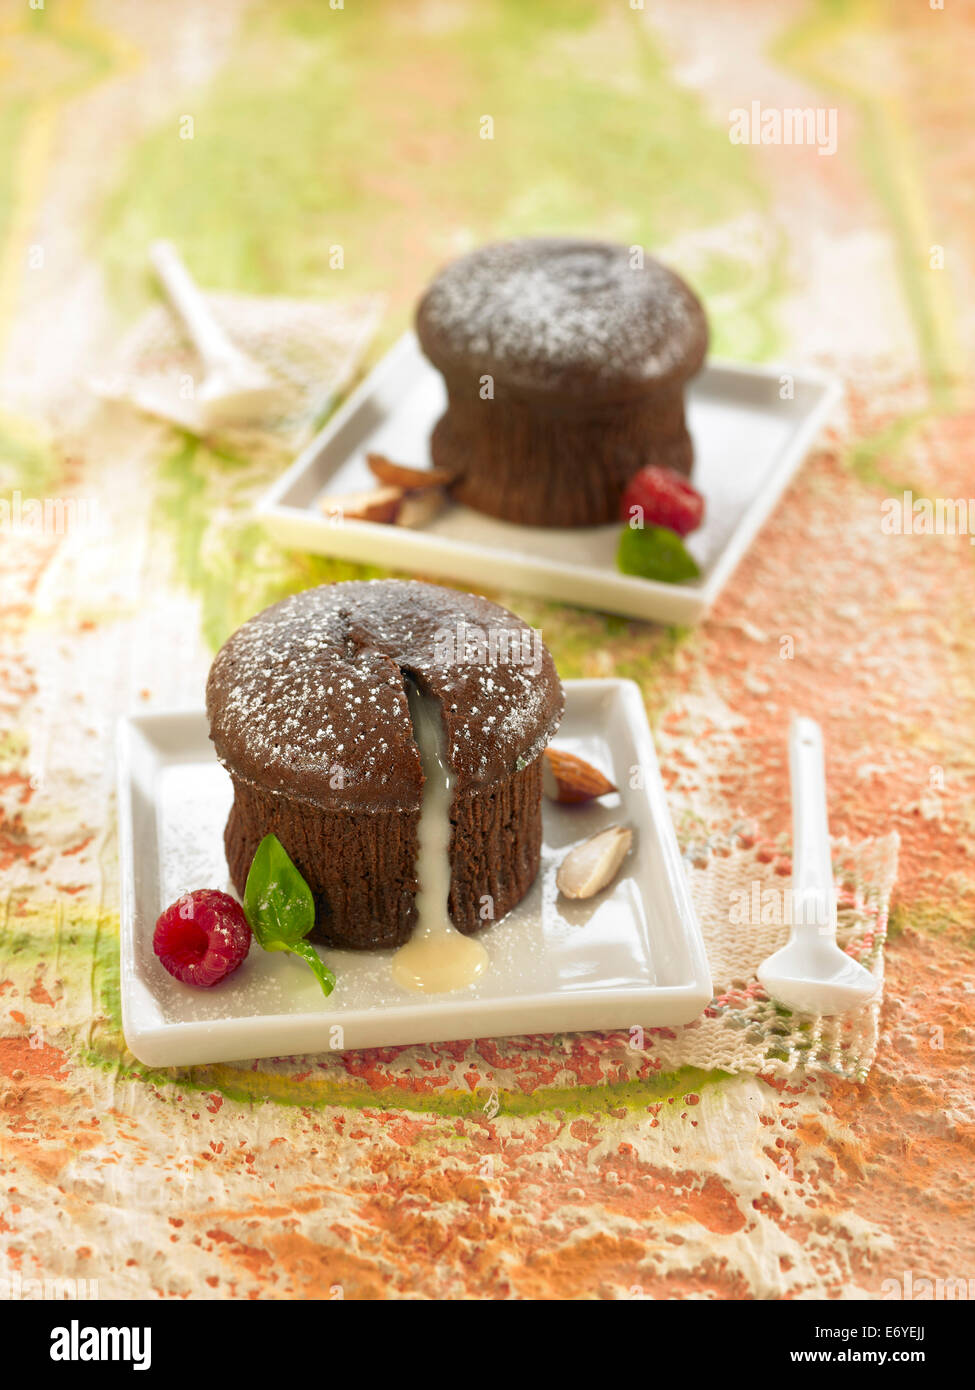 Dark chocolate fondant with a runny white chocolate filling Stock Photo